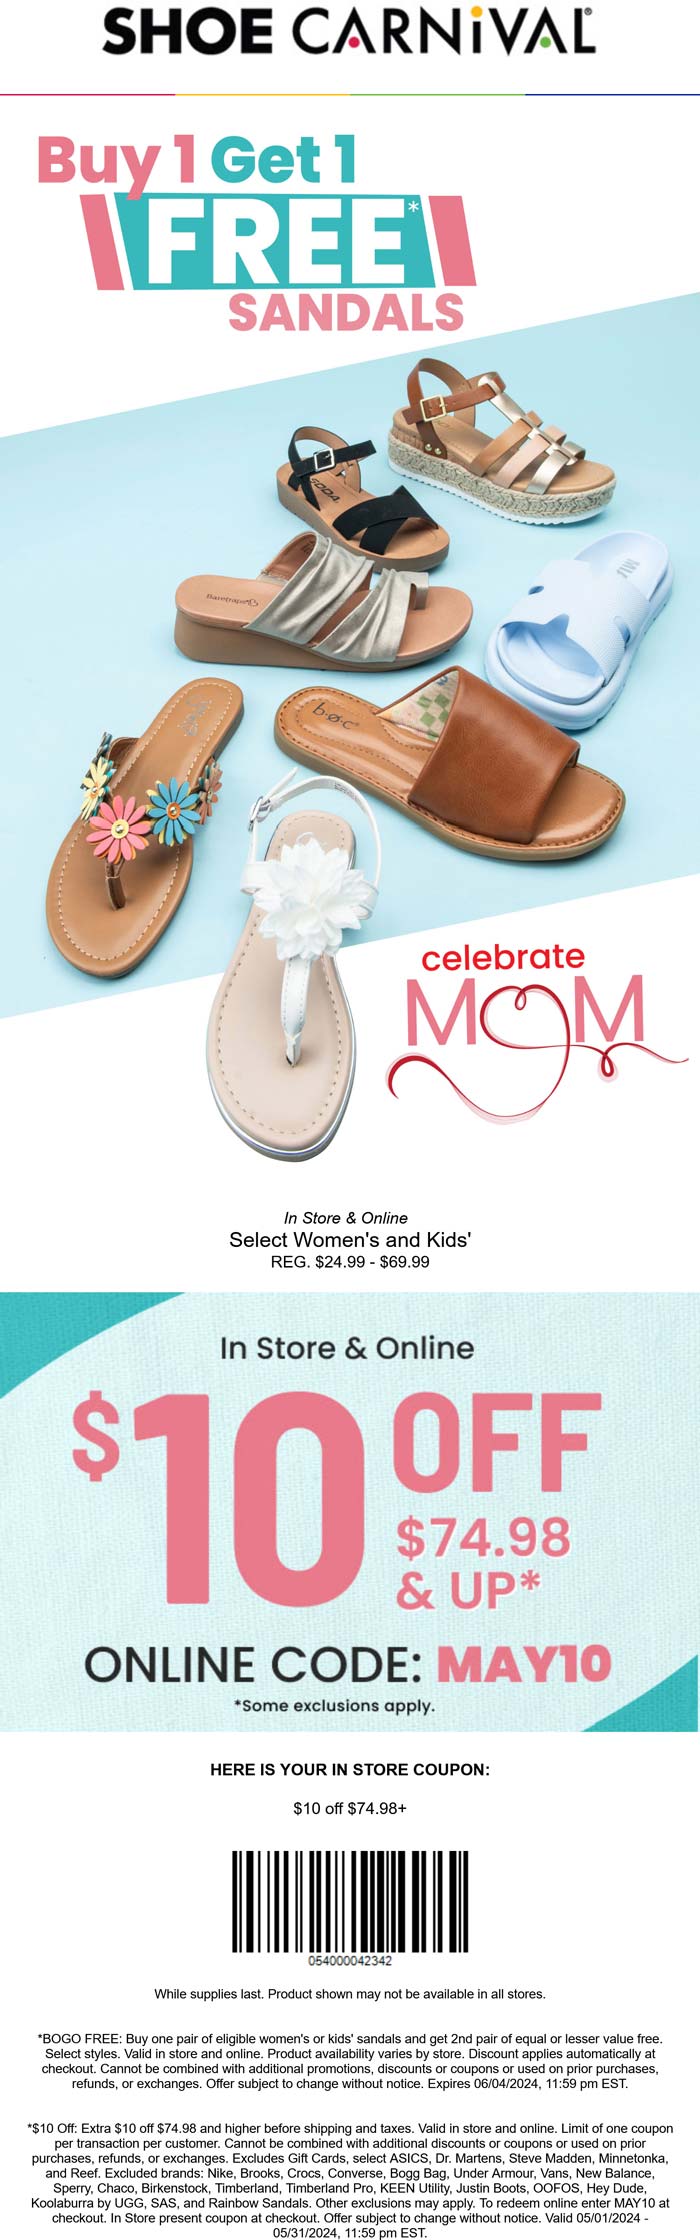 Shoe Carnival stores Coupon  Second sandal free & $10 off $75 at Shoe Carnival, or online via promo code MAY10 #shoecarnival 